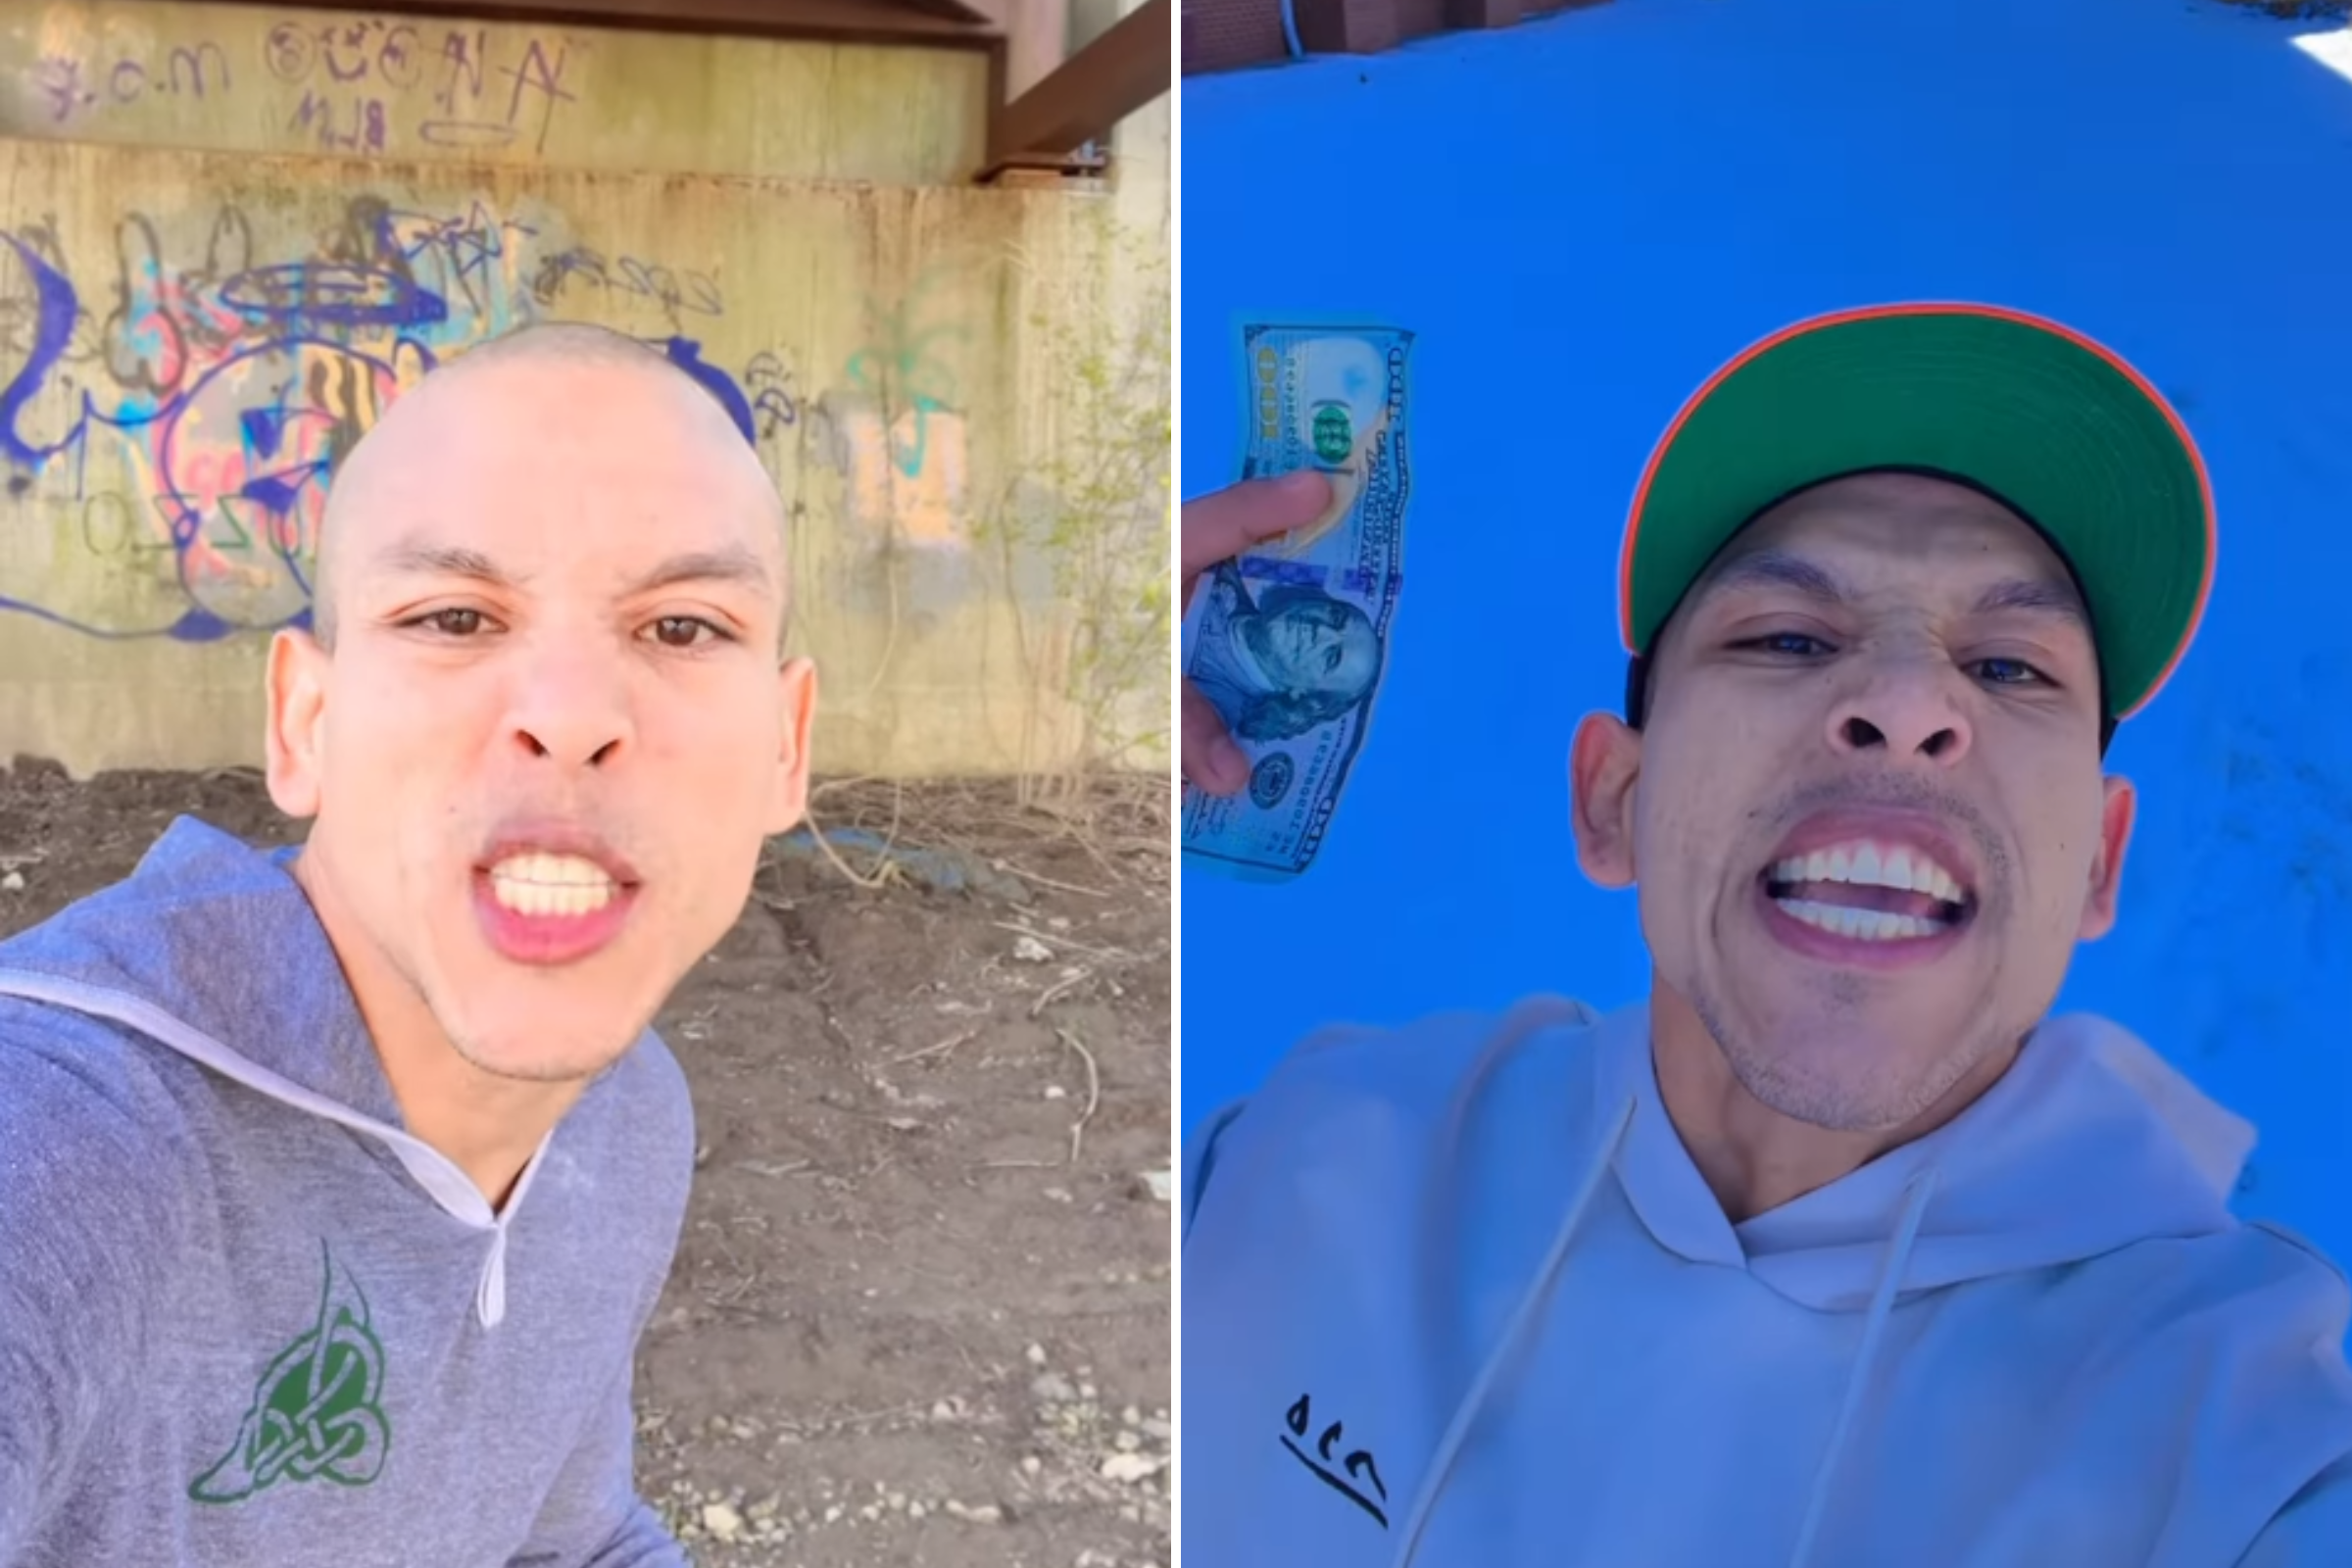 Who is Leonel Moreno? “Migrant influencer” now facing charges